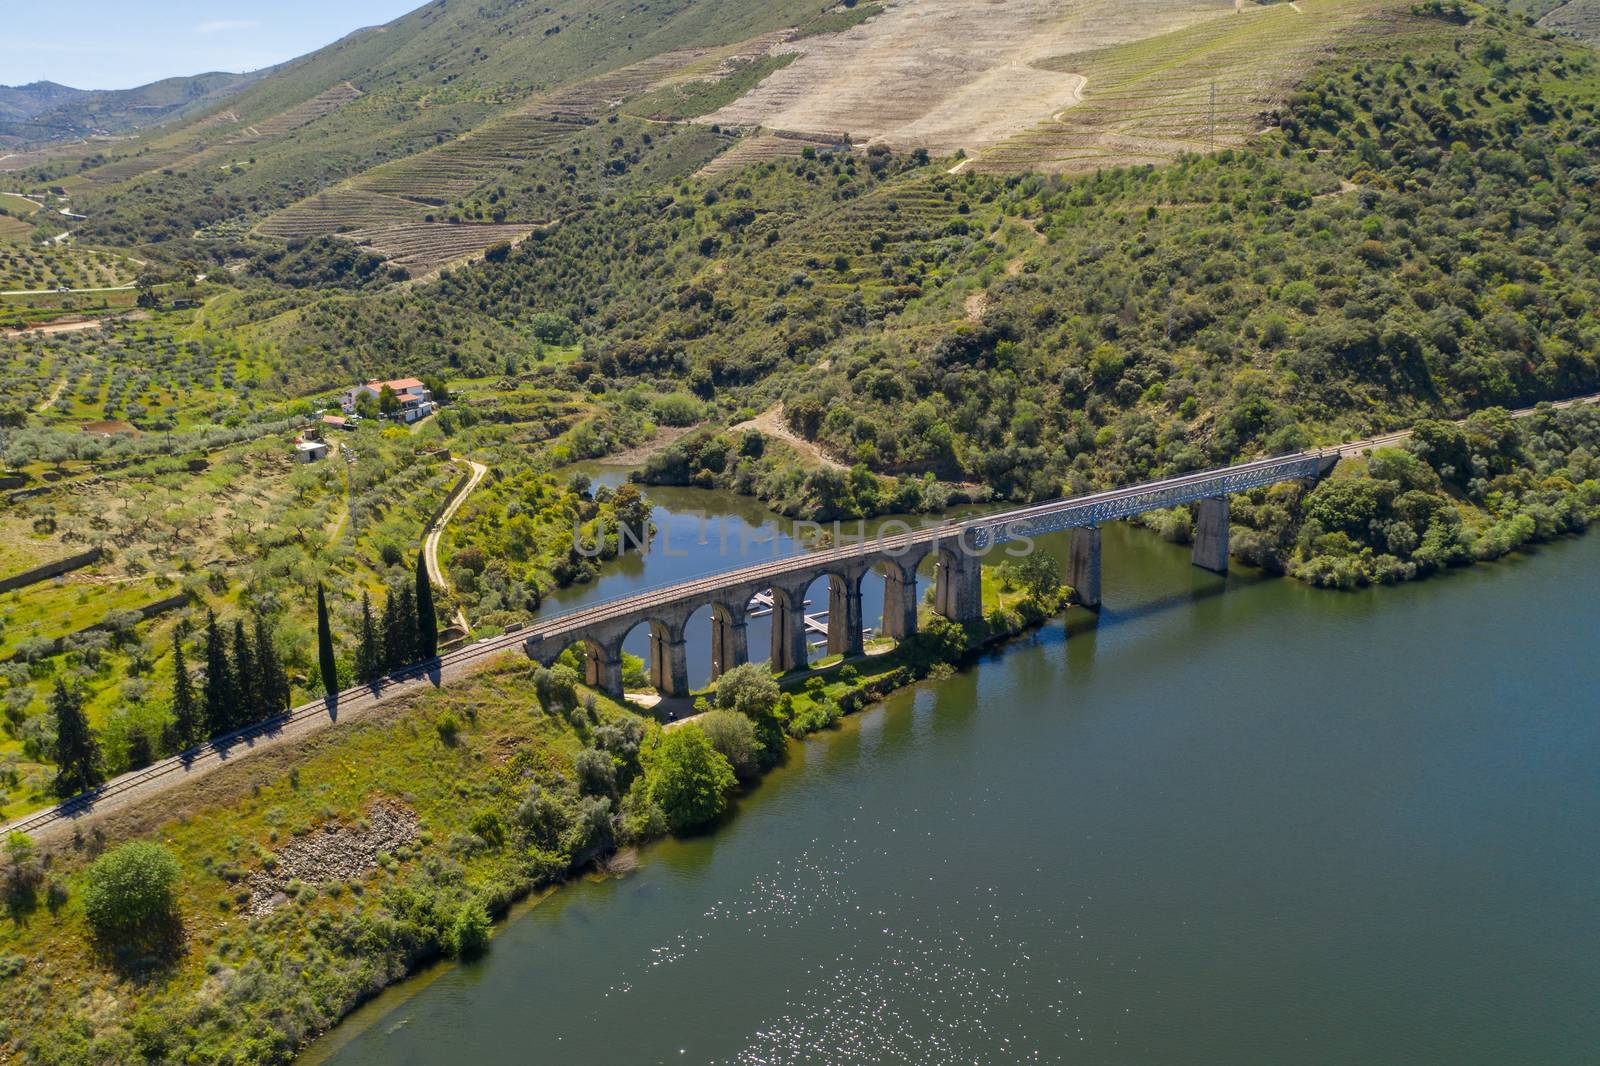 Bridge drone view like Harry Potter movie in Douro River Region, in Portugal by Luispinaphotography